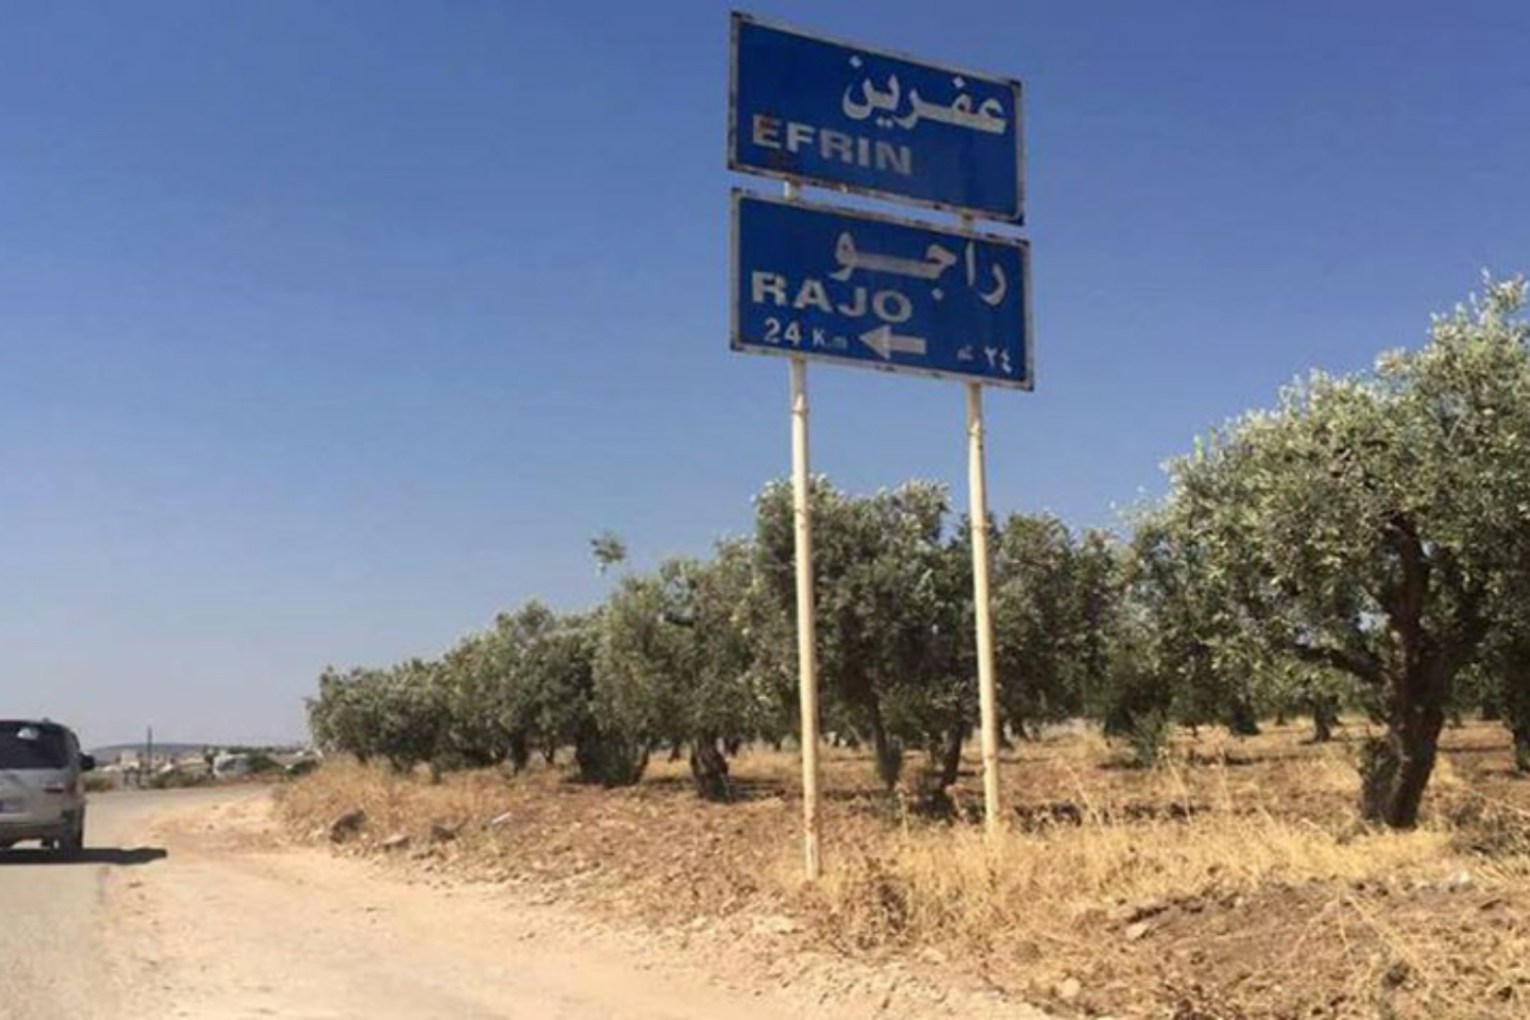 Militia-Led Kidnapping and Extortion Scheme in Rajo, Led by Abu Hatem Shqra